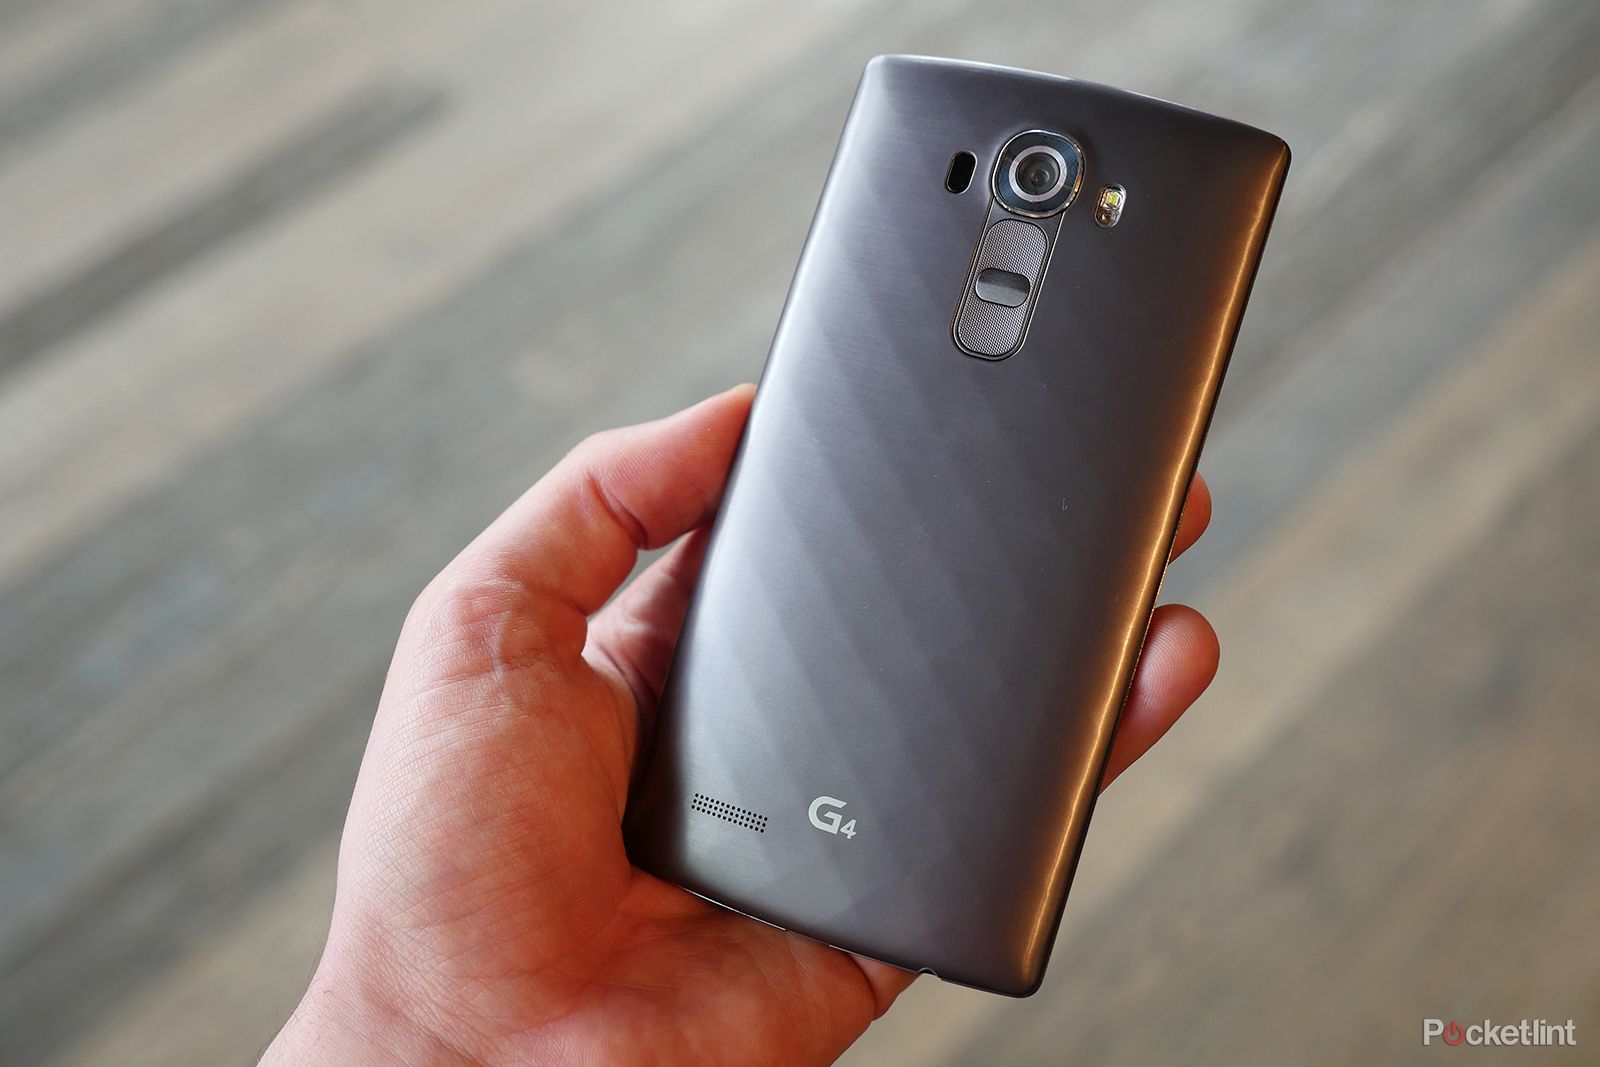 lg g4 first third party phone to get android 6 0 marshmallow rollout begins next week image 1